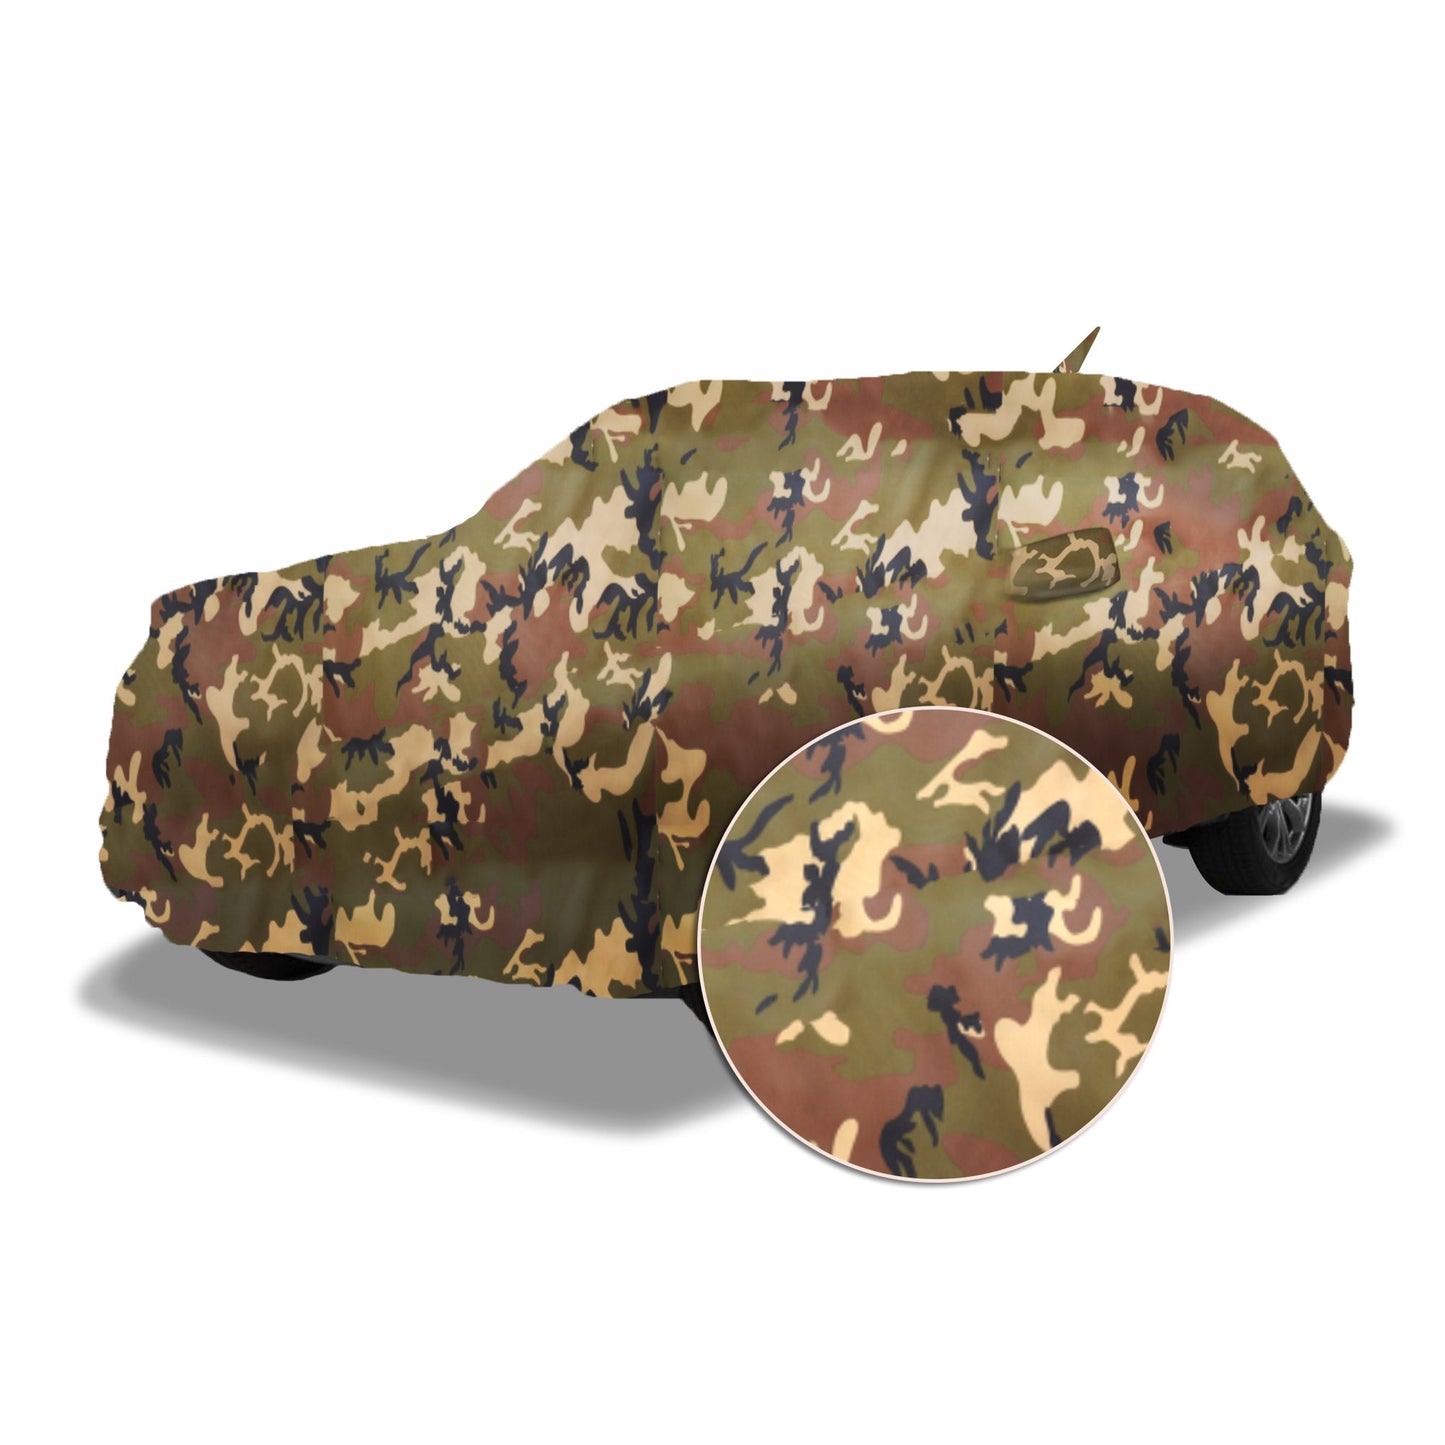 Ascot Chevrolet Beat Car Body Cover Extra Strong & Dust Proof Jungle Military Car Cover with UV Proof & Water-Resistant Coating